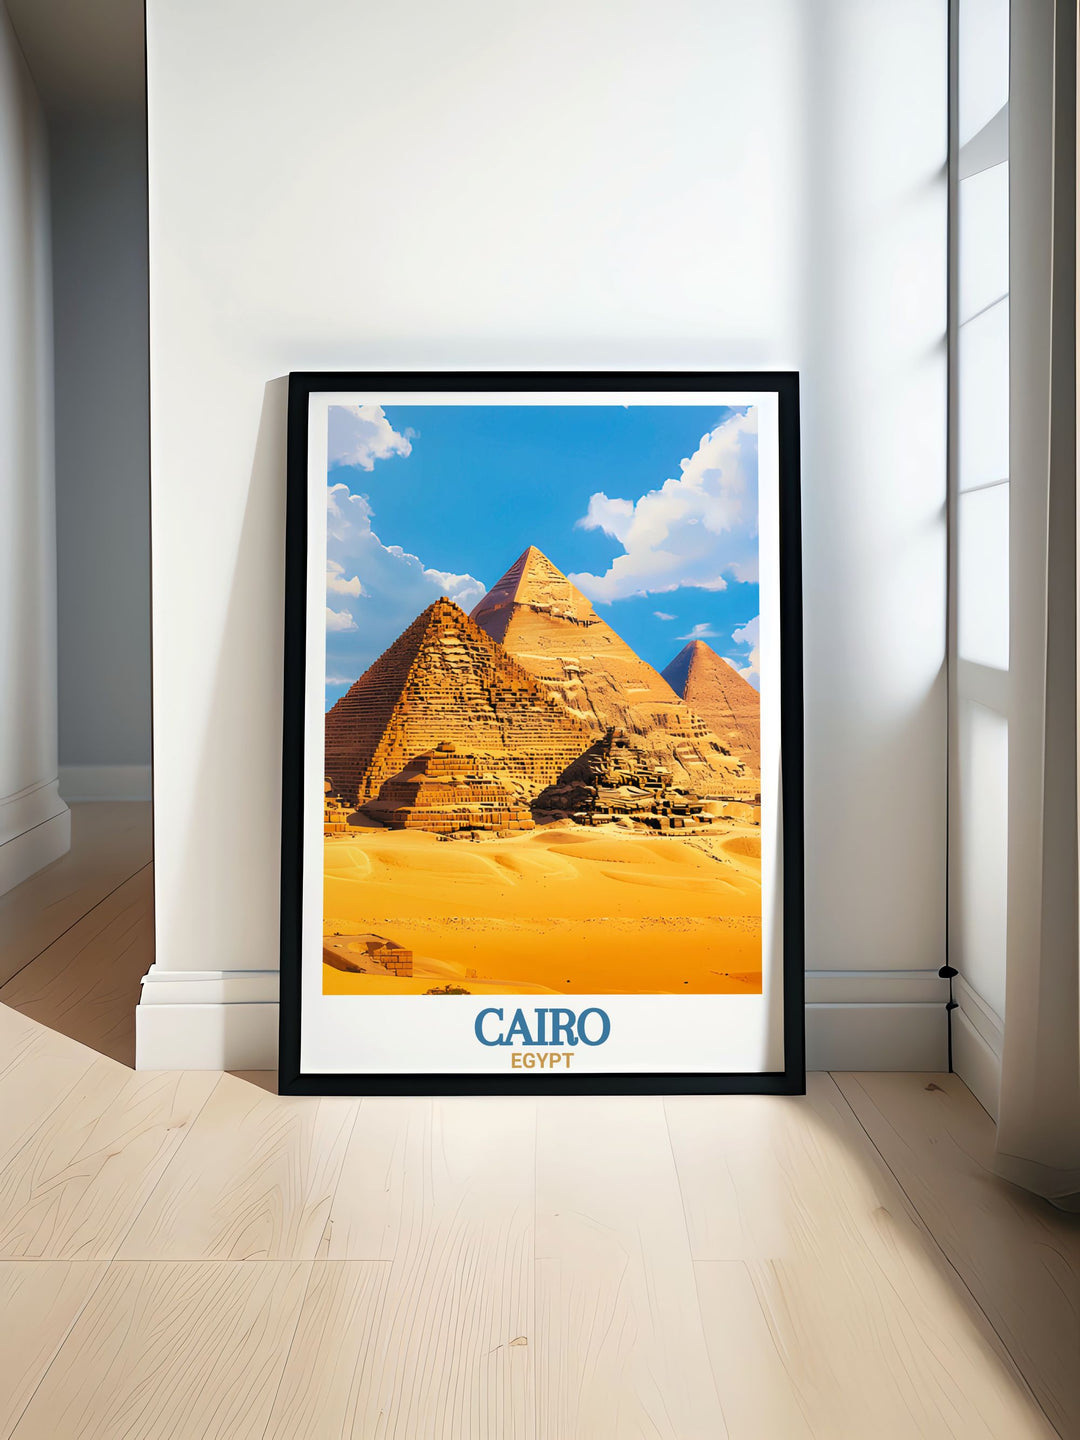 Discover the majesty of The Pyramids of Giza with this stunning travel poster perfect for adding a touch of Egypts ancient history to your home decor ideal for lovers of vintage posters and unique wall art.